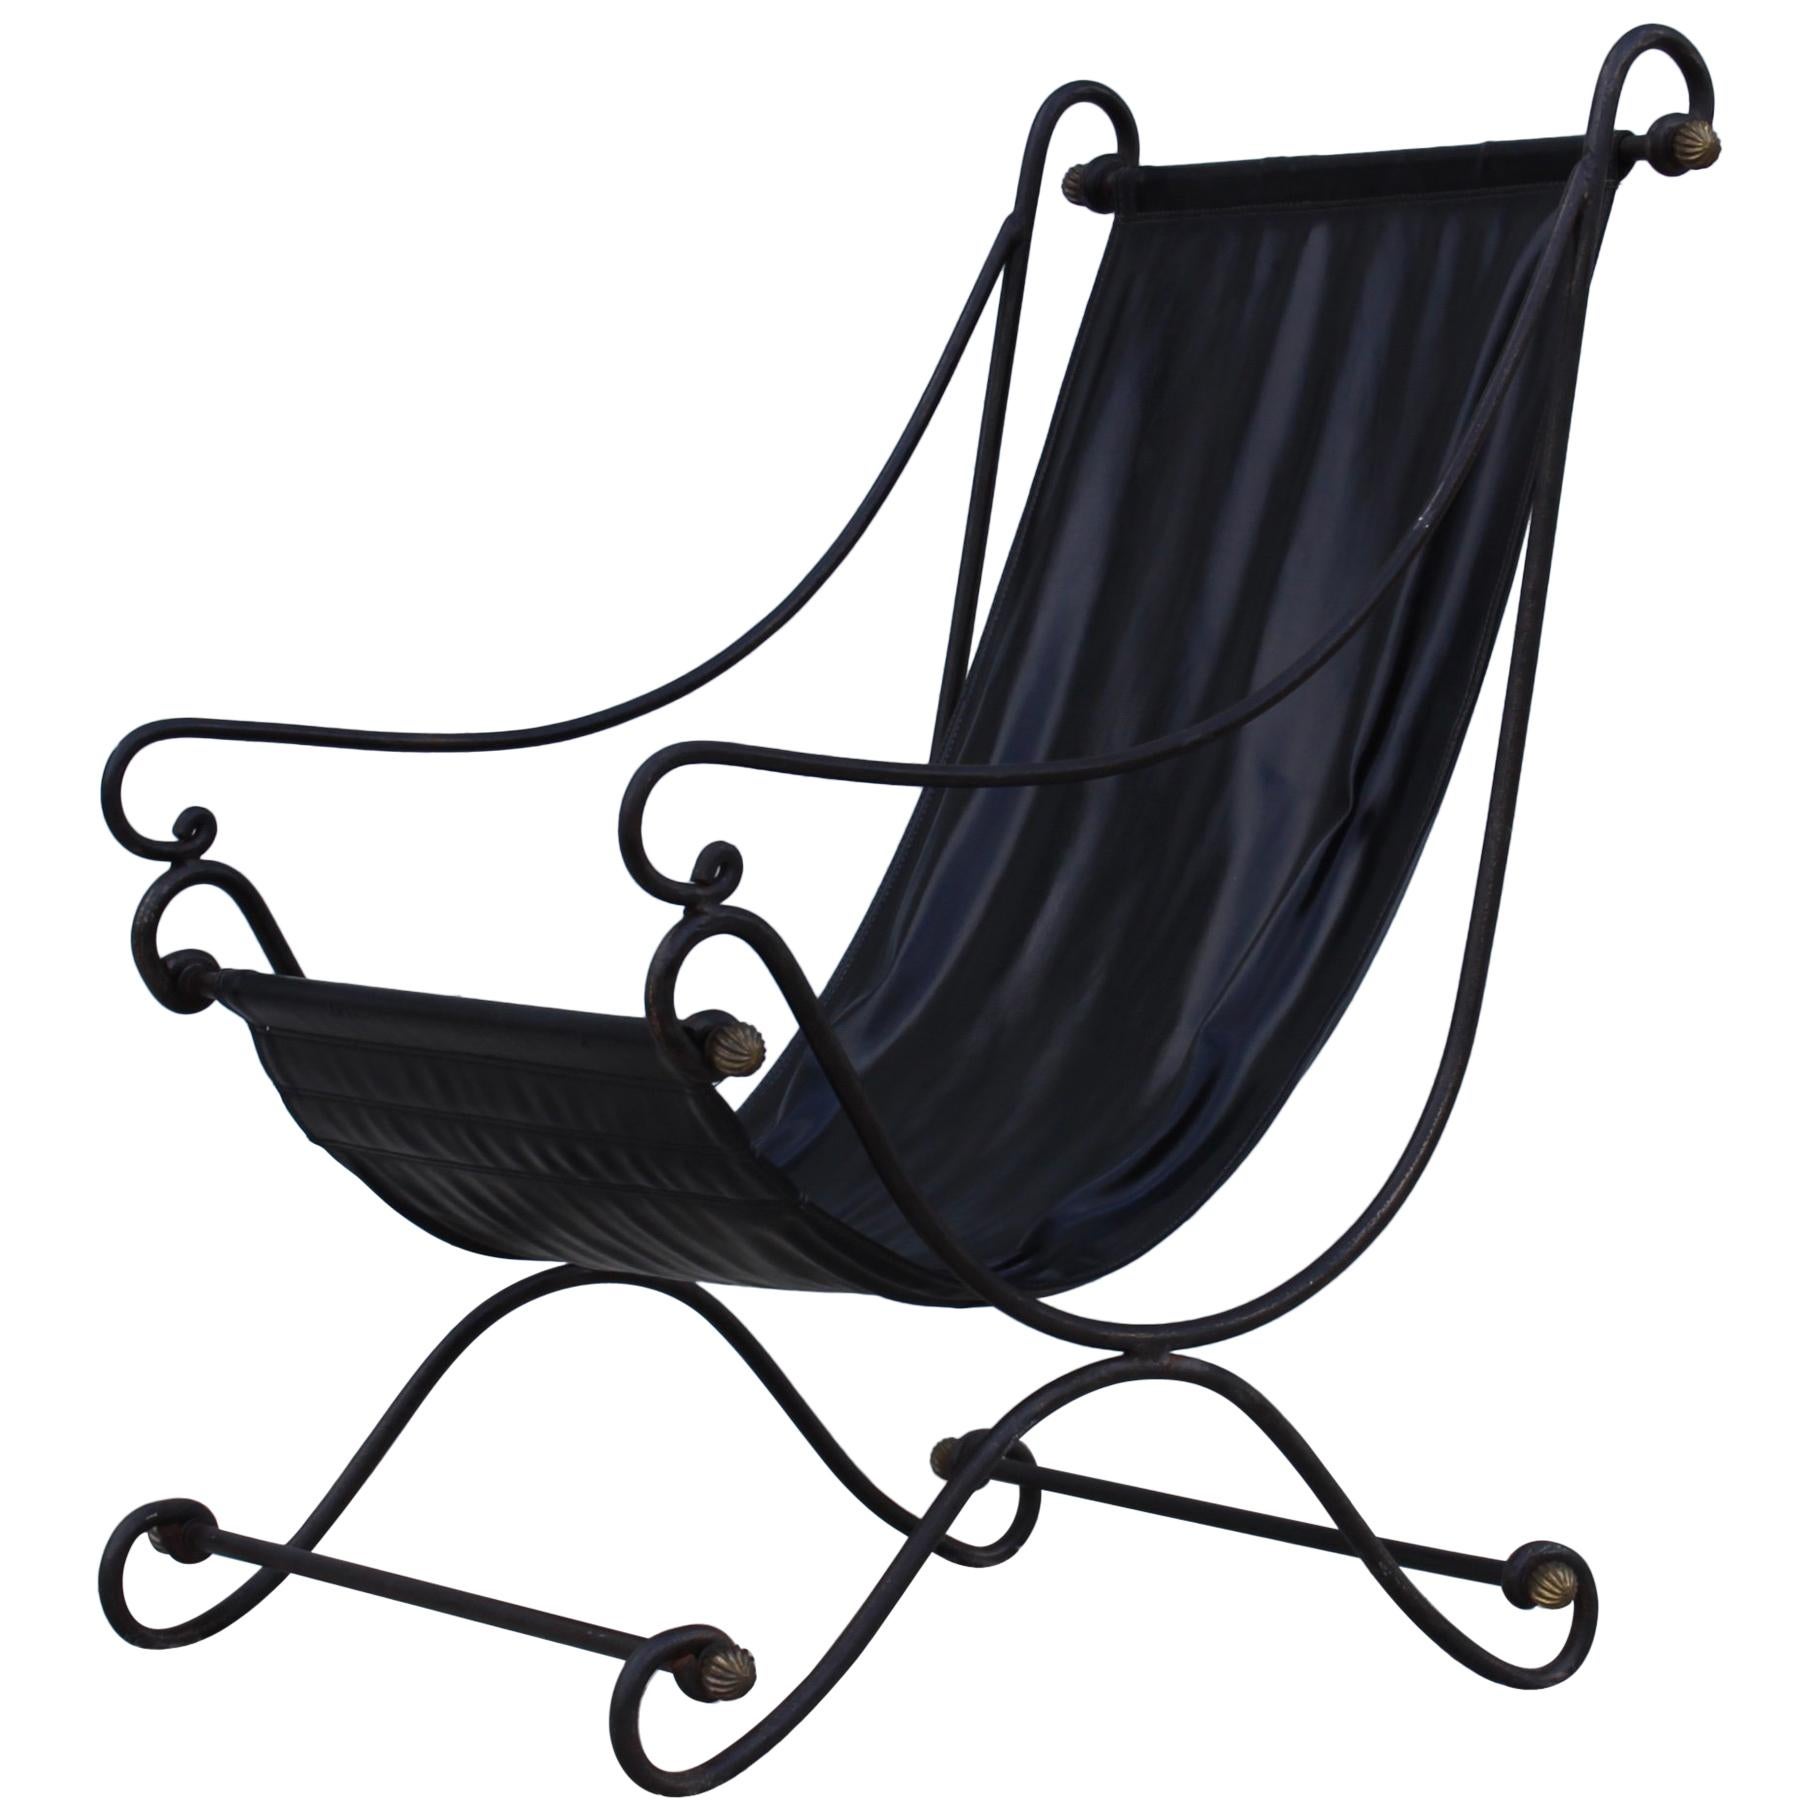 Scrolled Iron Sling Lounge Chair